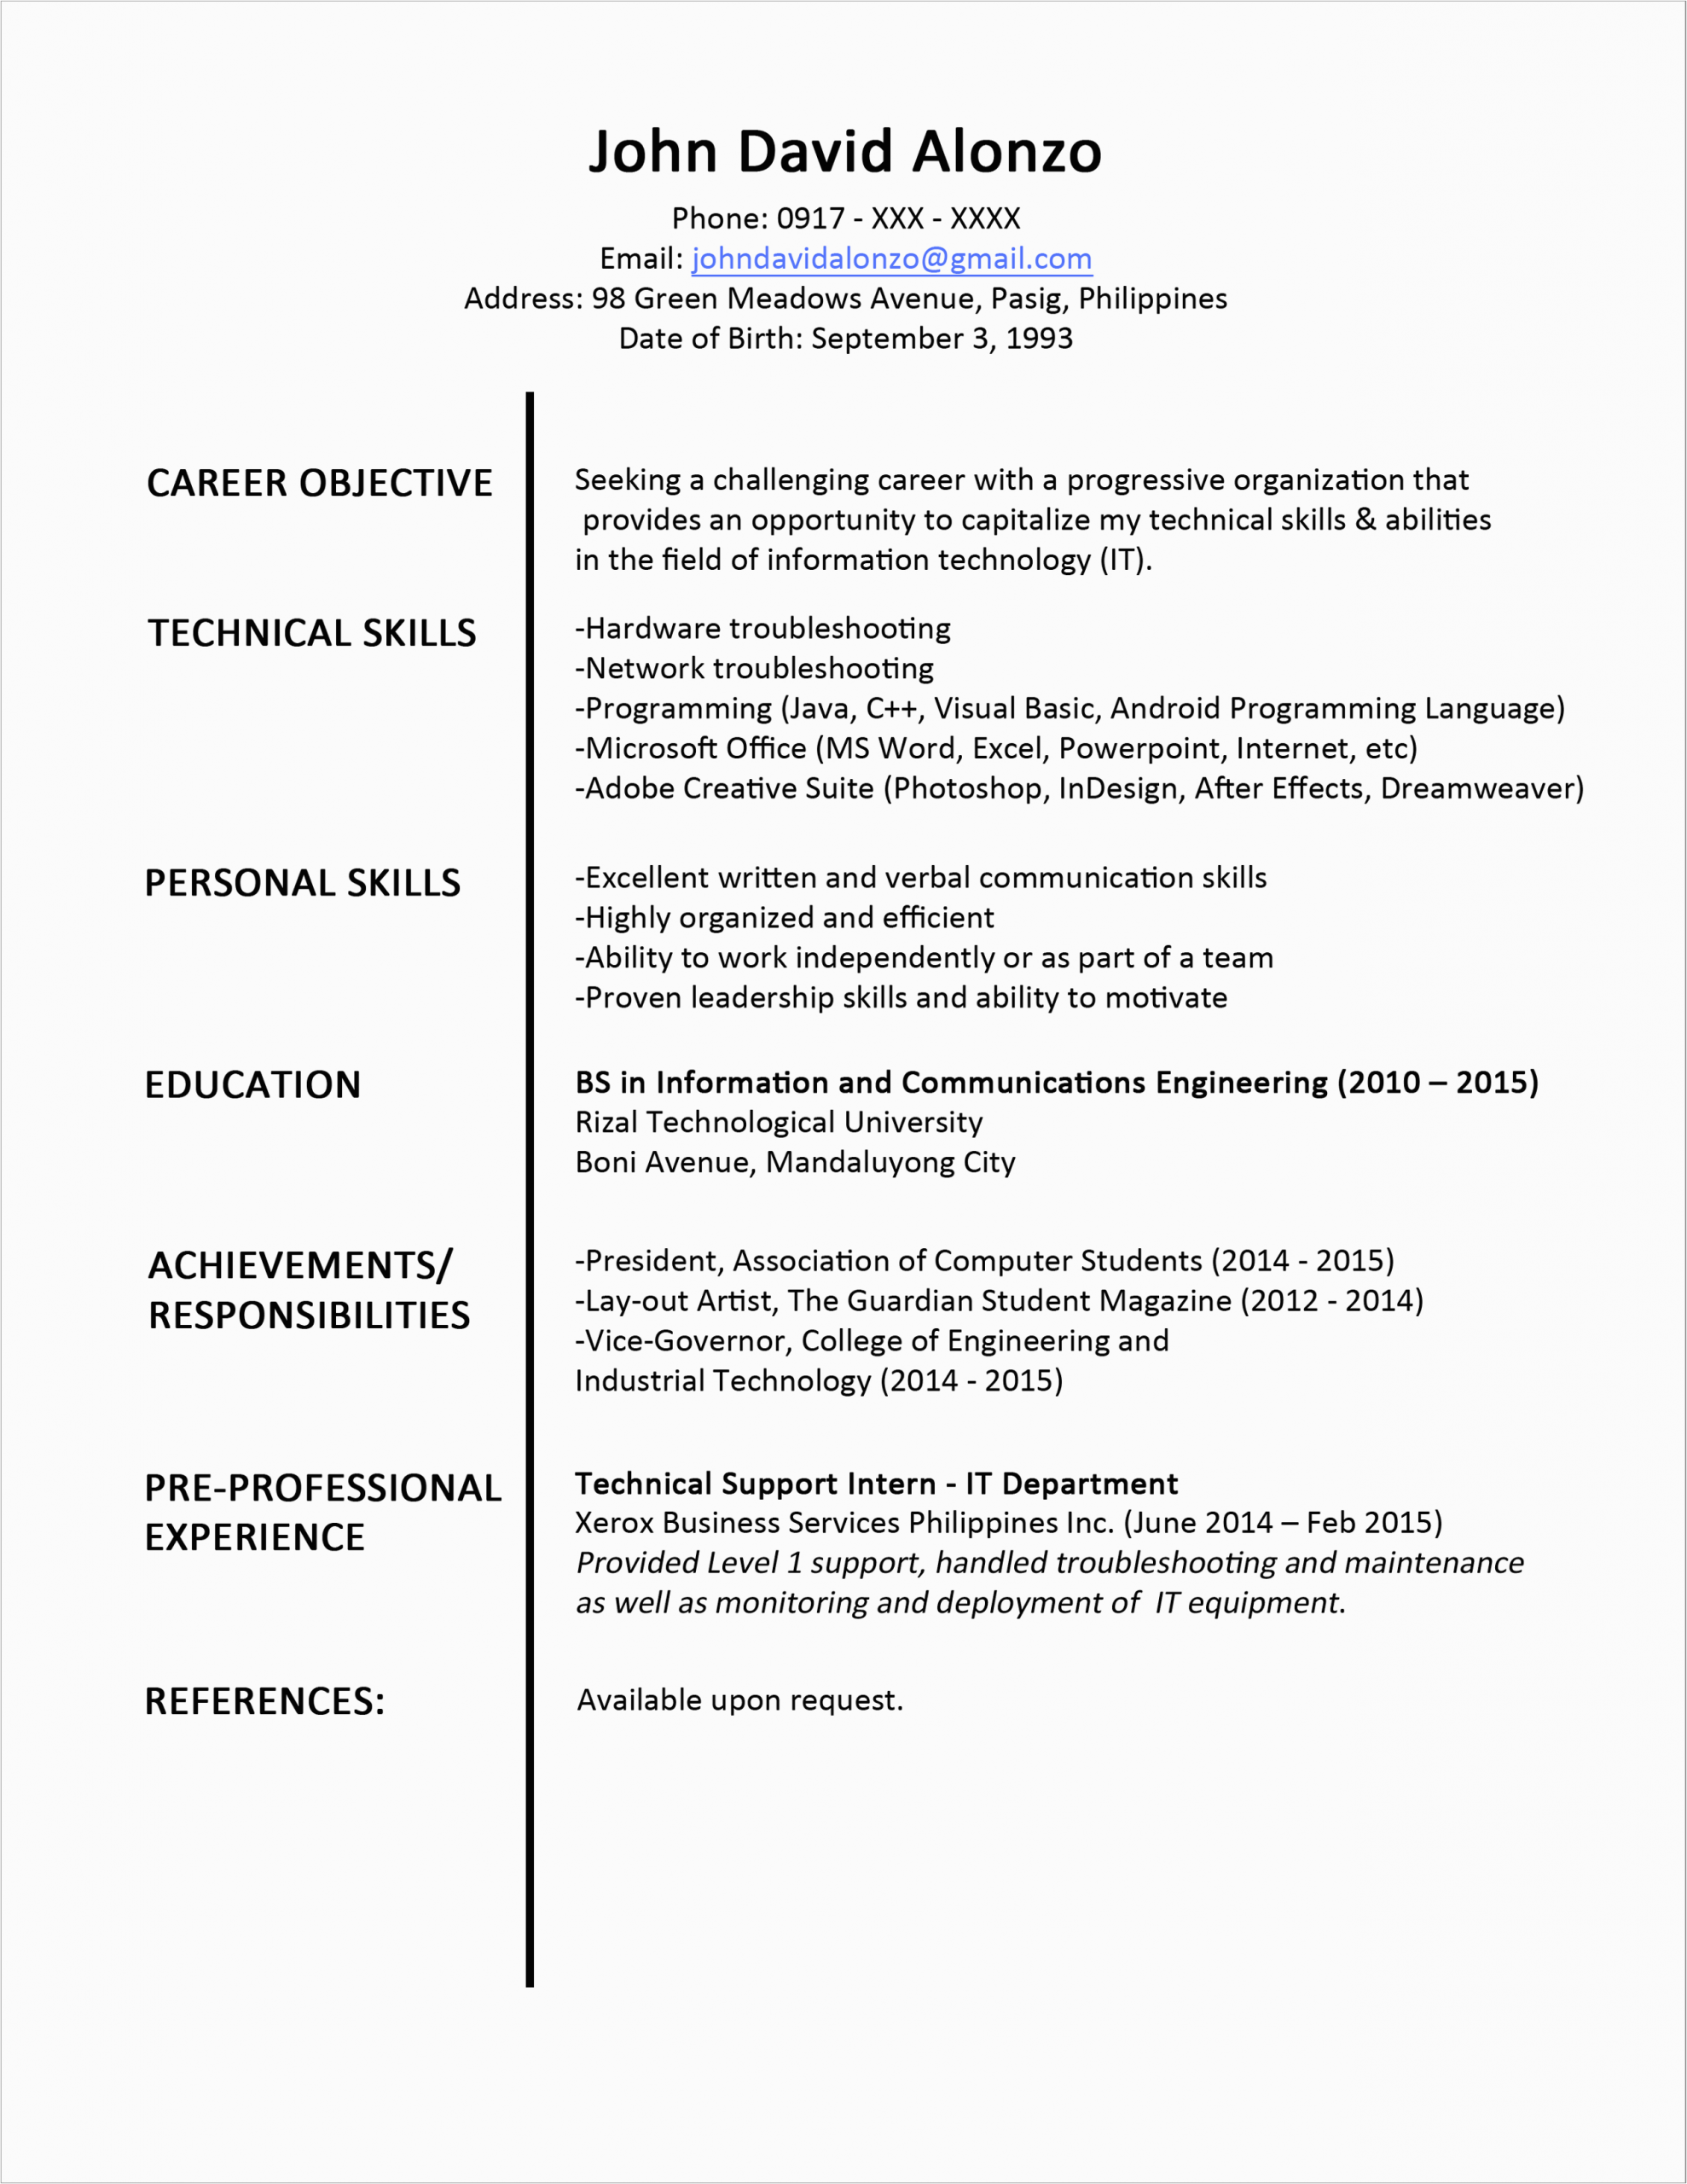 Information Technology Sample Resume for Fresh Graduates Sample Fresh Graduate Resume format for Technical Support